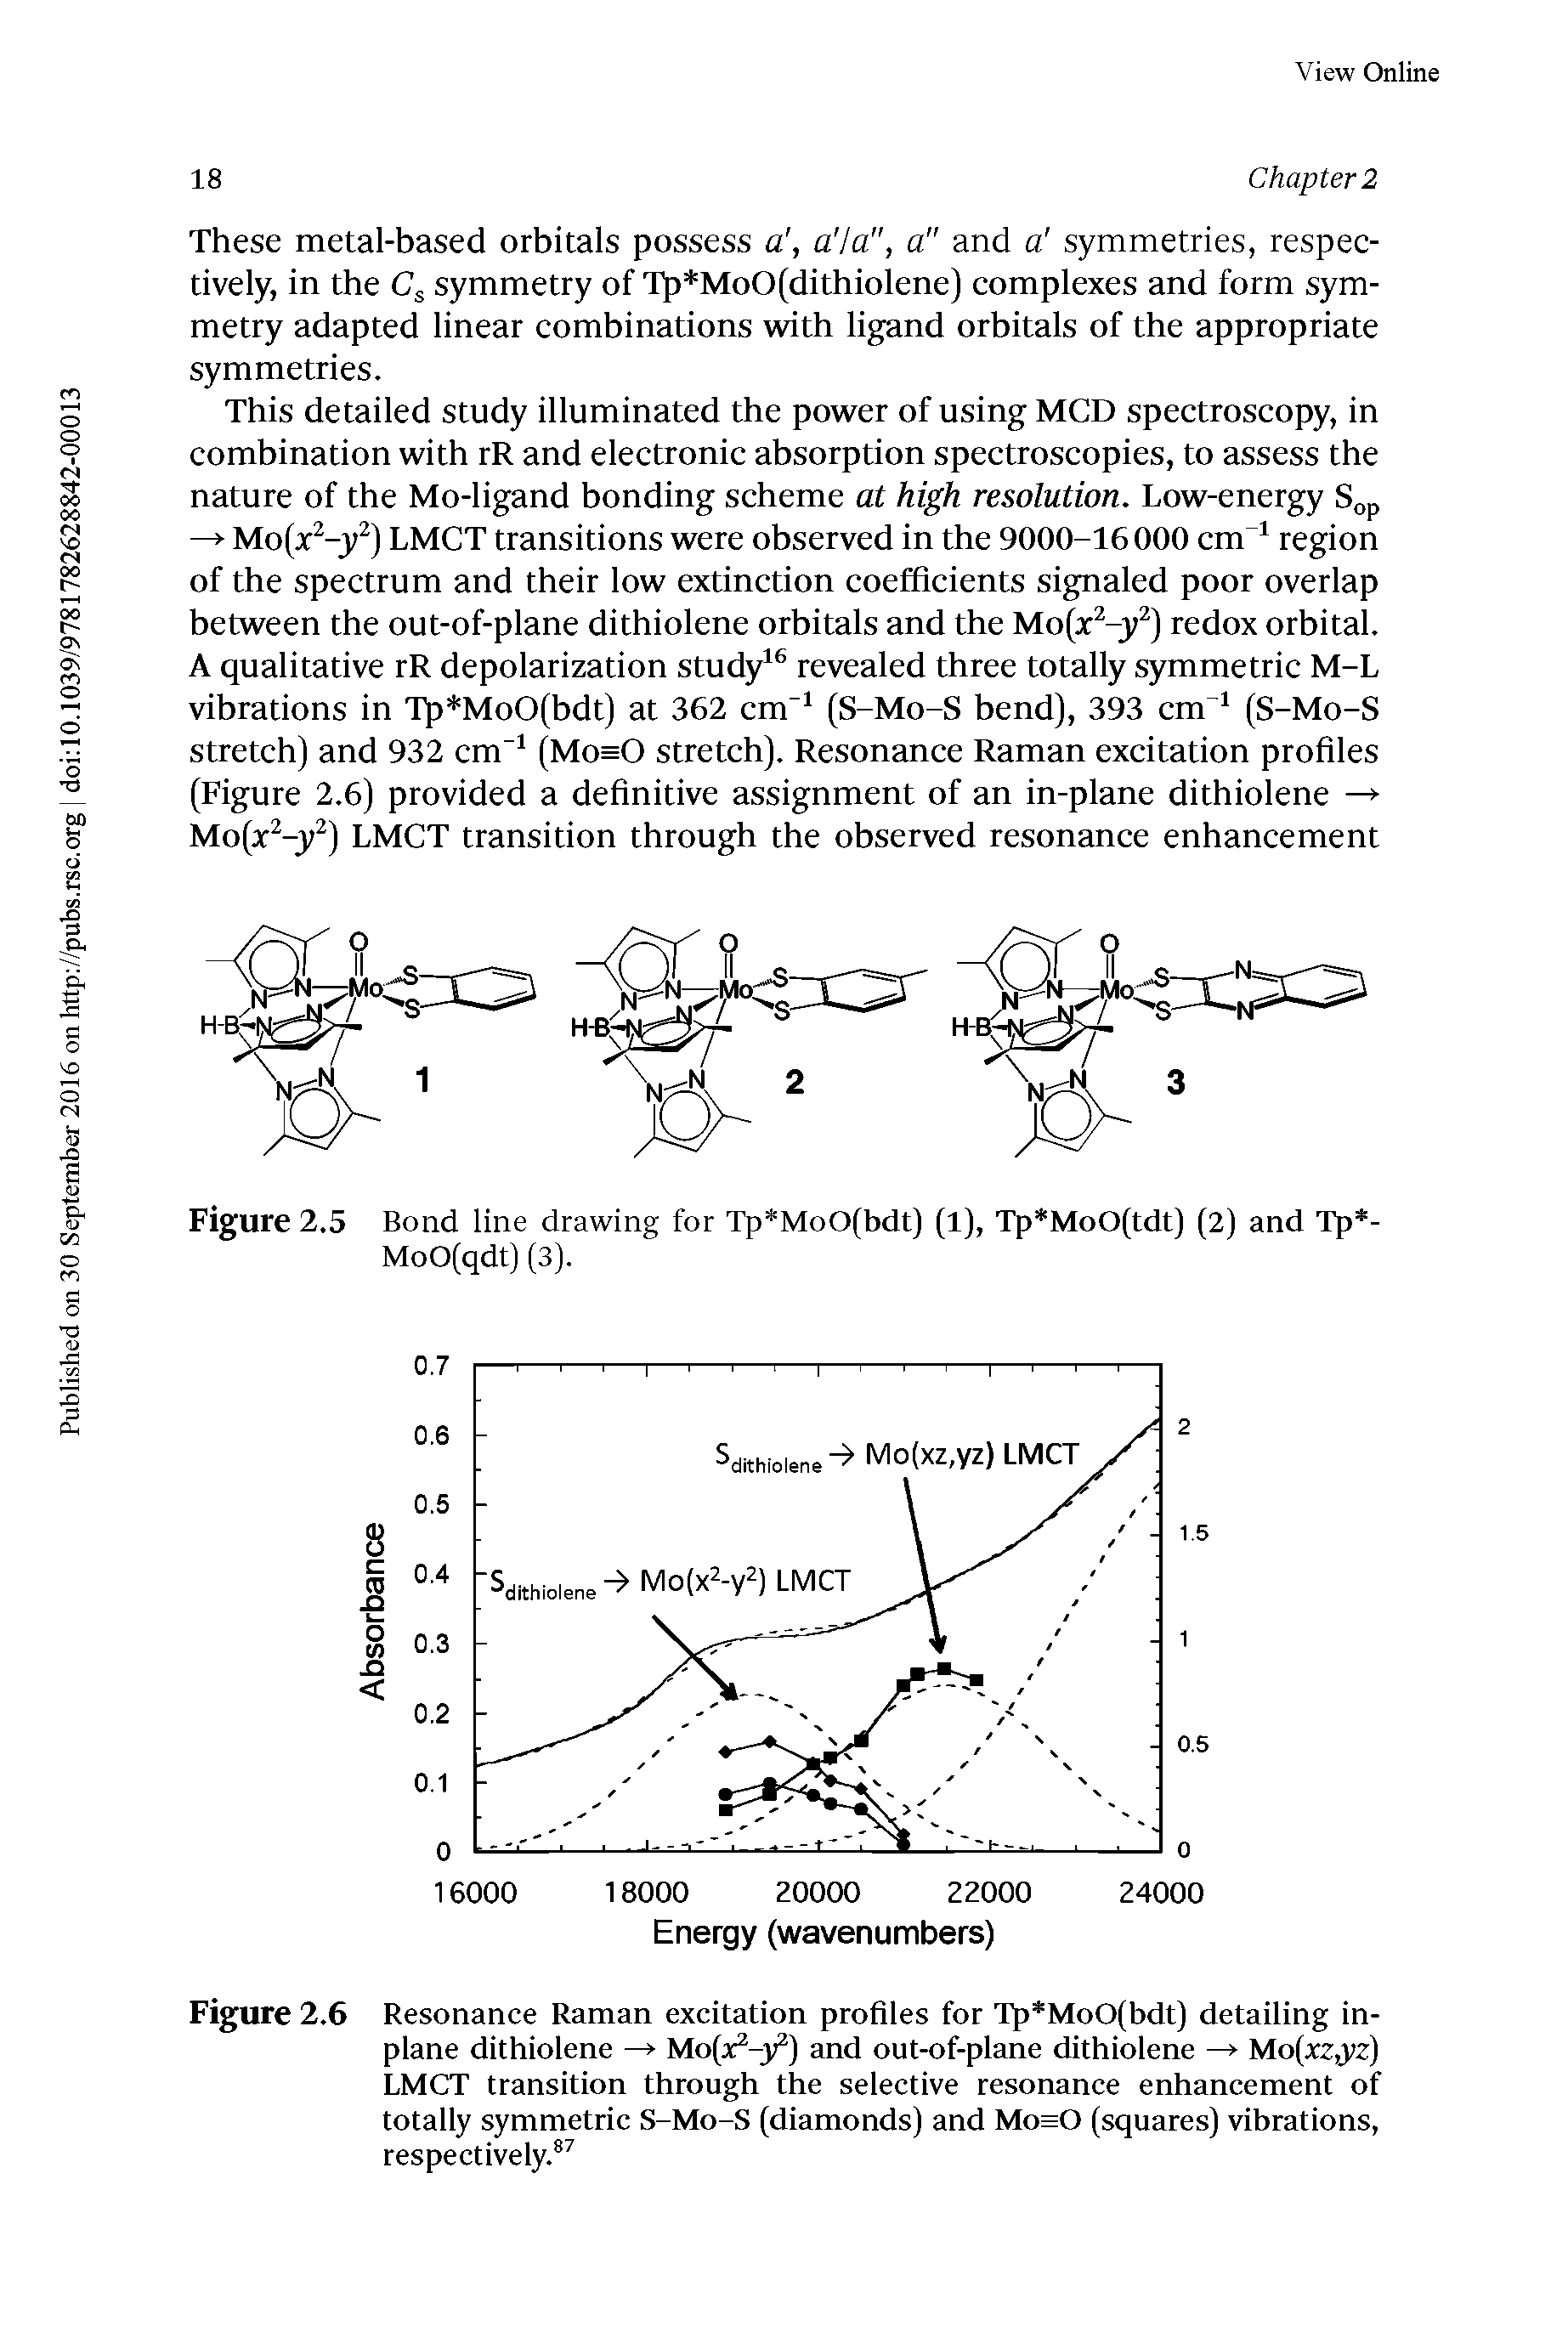 Figure 2.6 Resonance Raman excitation profiles for Tp MoO(bdt) detailing inplane dithiolene Mo(x -y) and out-of-plane dithiolene Mo(x2jV2) LMCT transition through the selective resonance enhancement of totally symmetric S-Mo-S (diamonds) and Mo O (squares) vibrations, respectively. ...